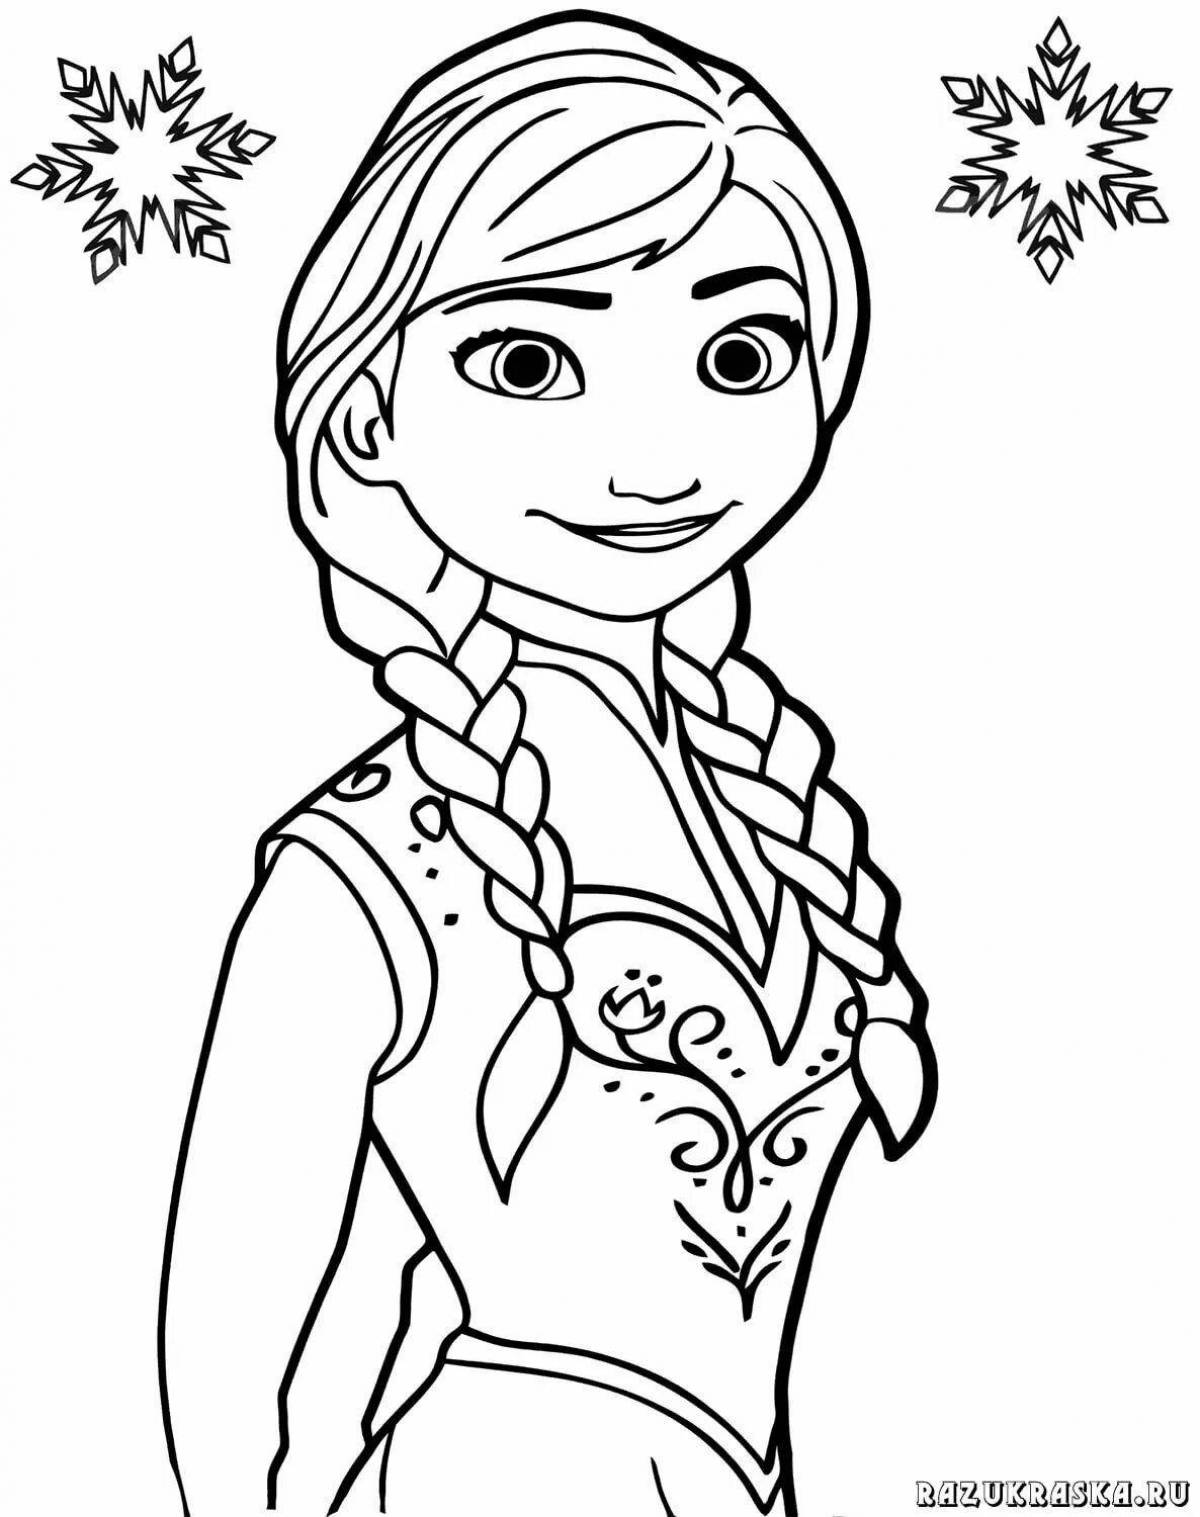 Frozen Magic Coloring Page for 5-6 year olds